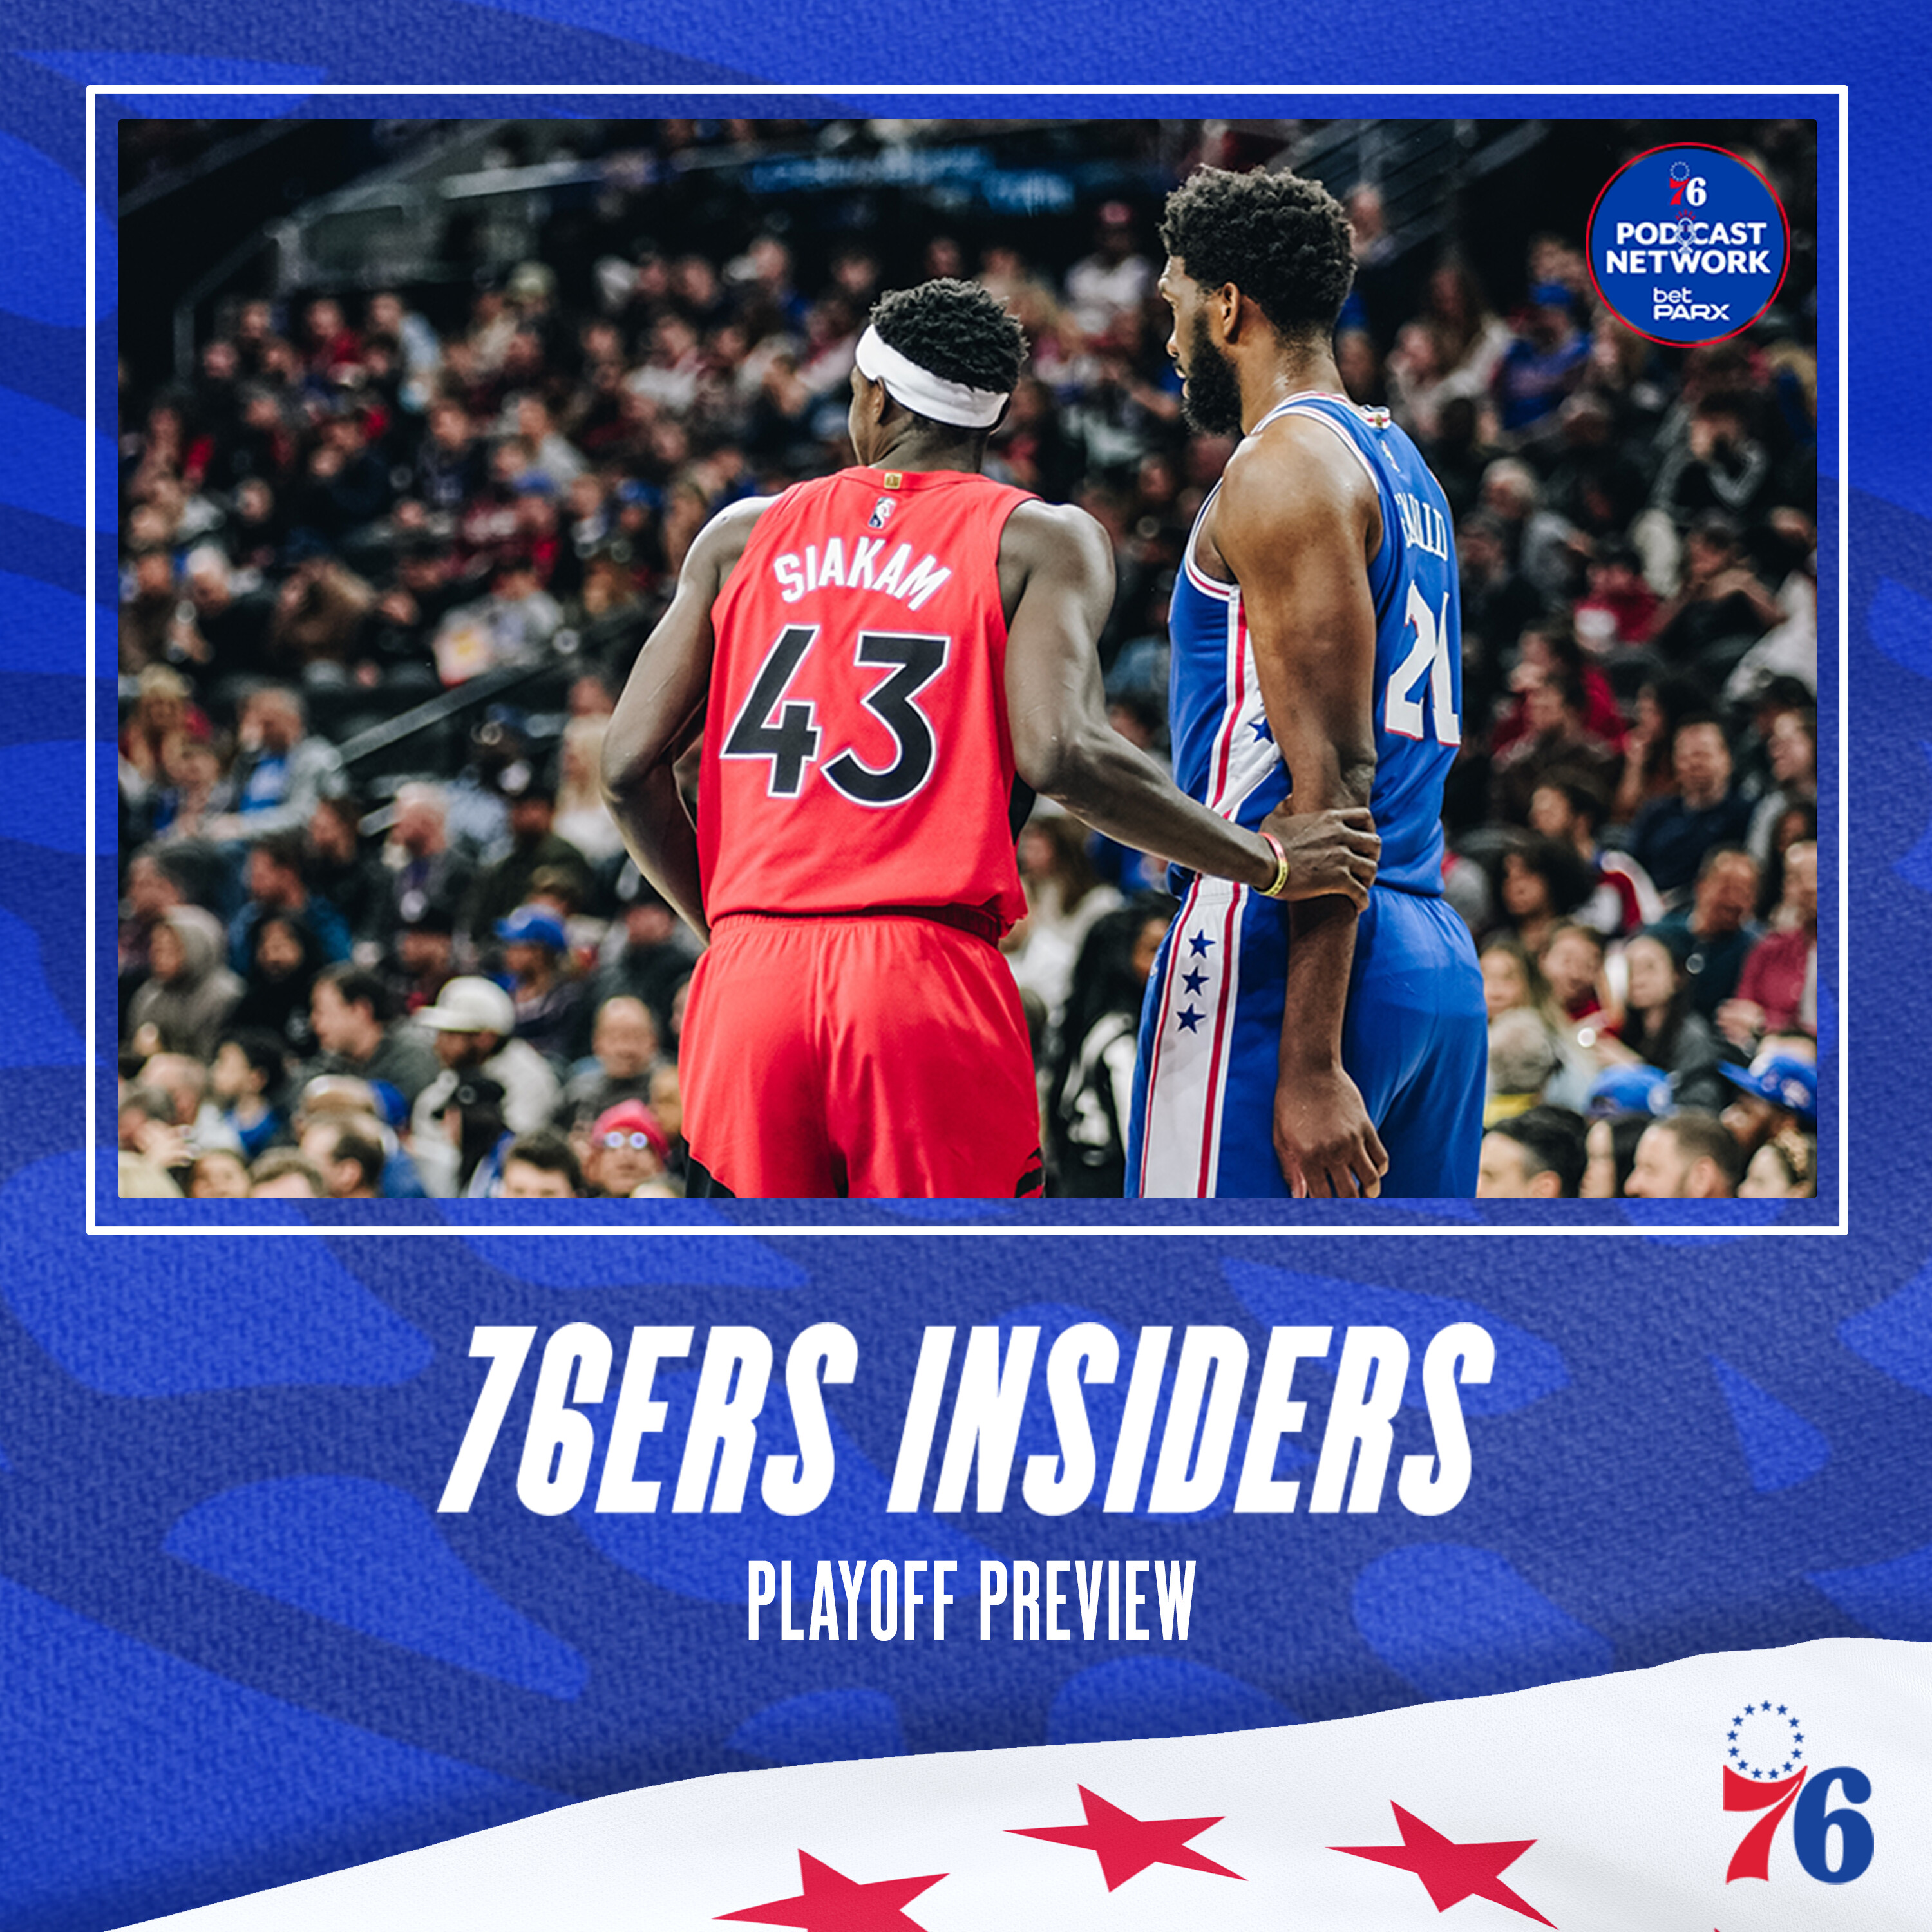 Special Edition 76ers Playoff Preview